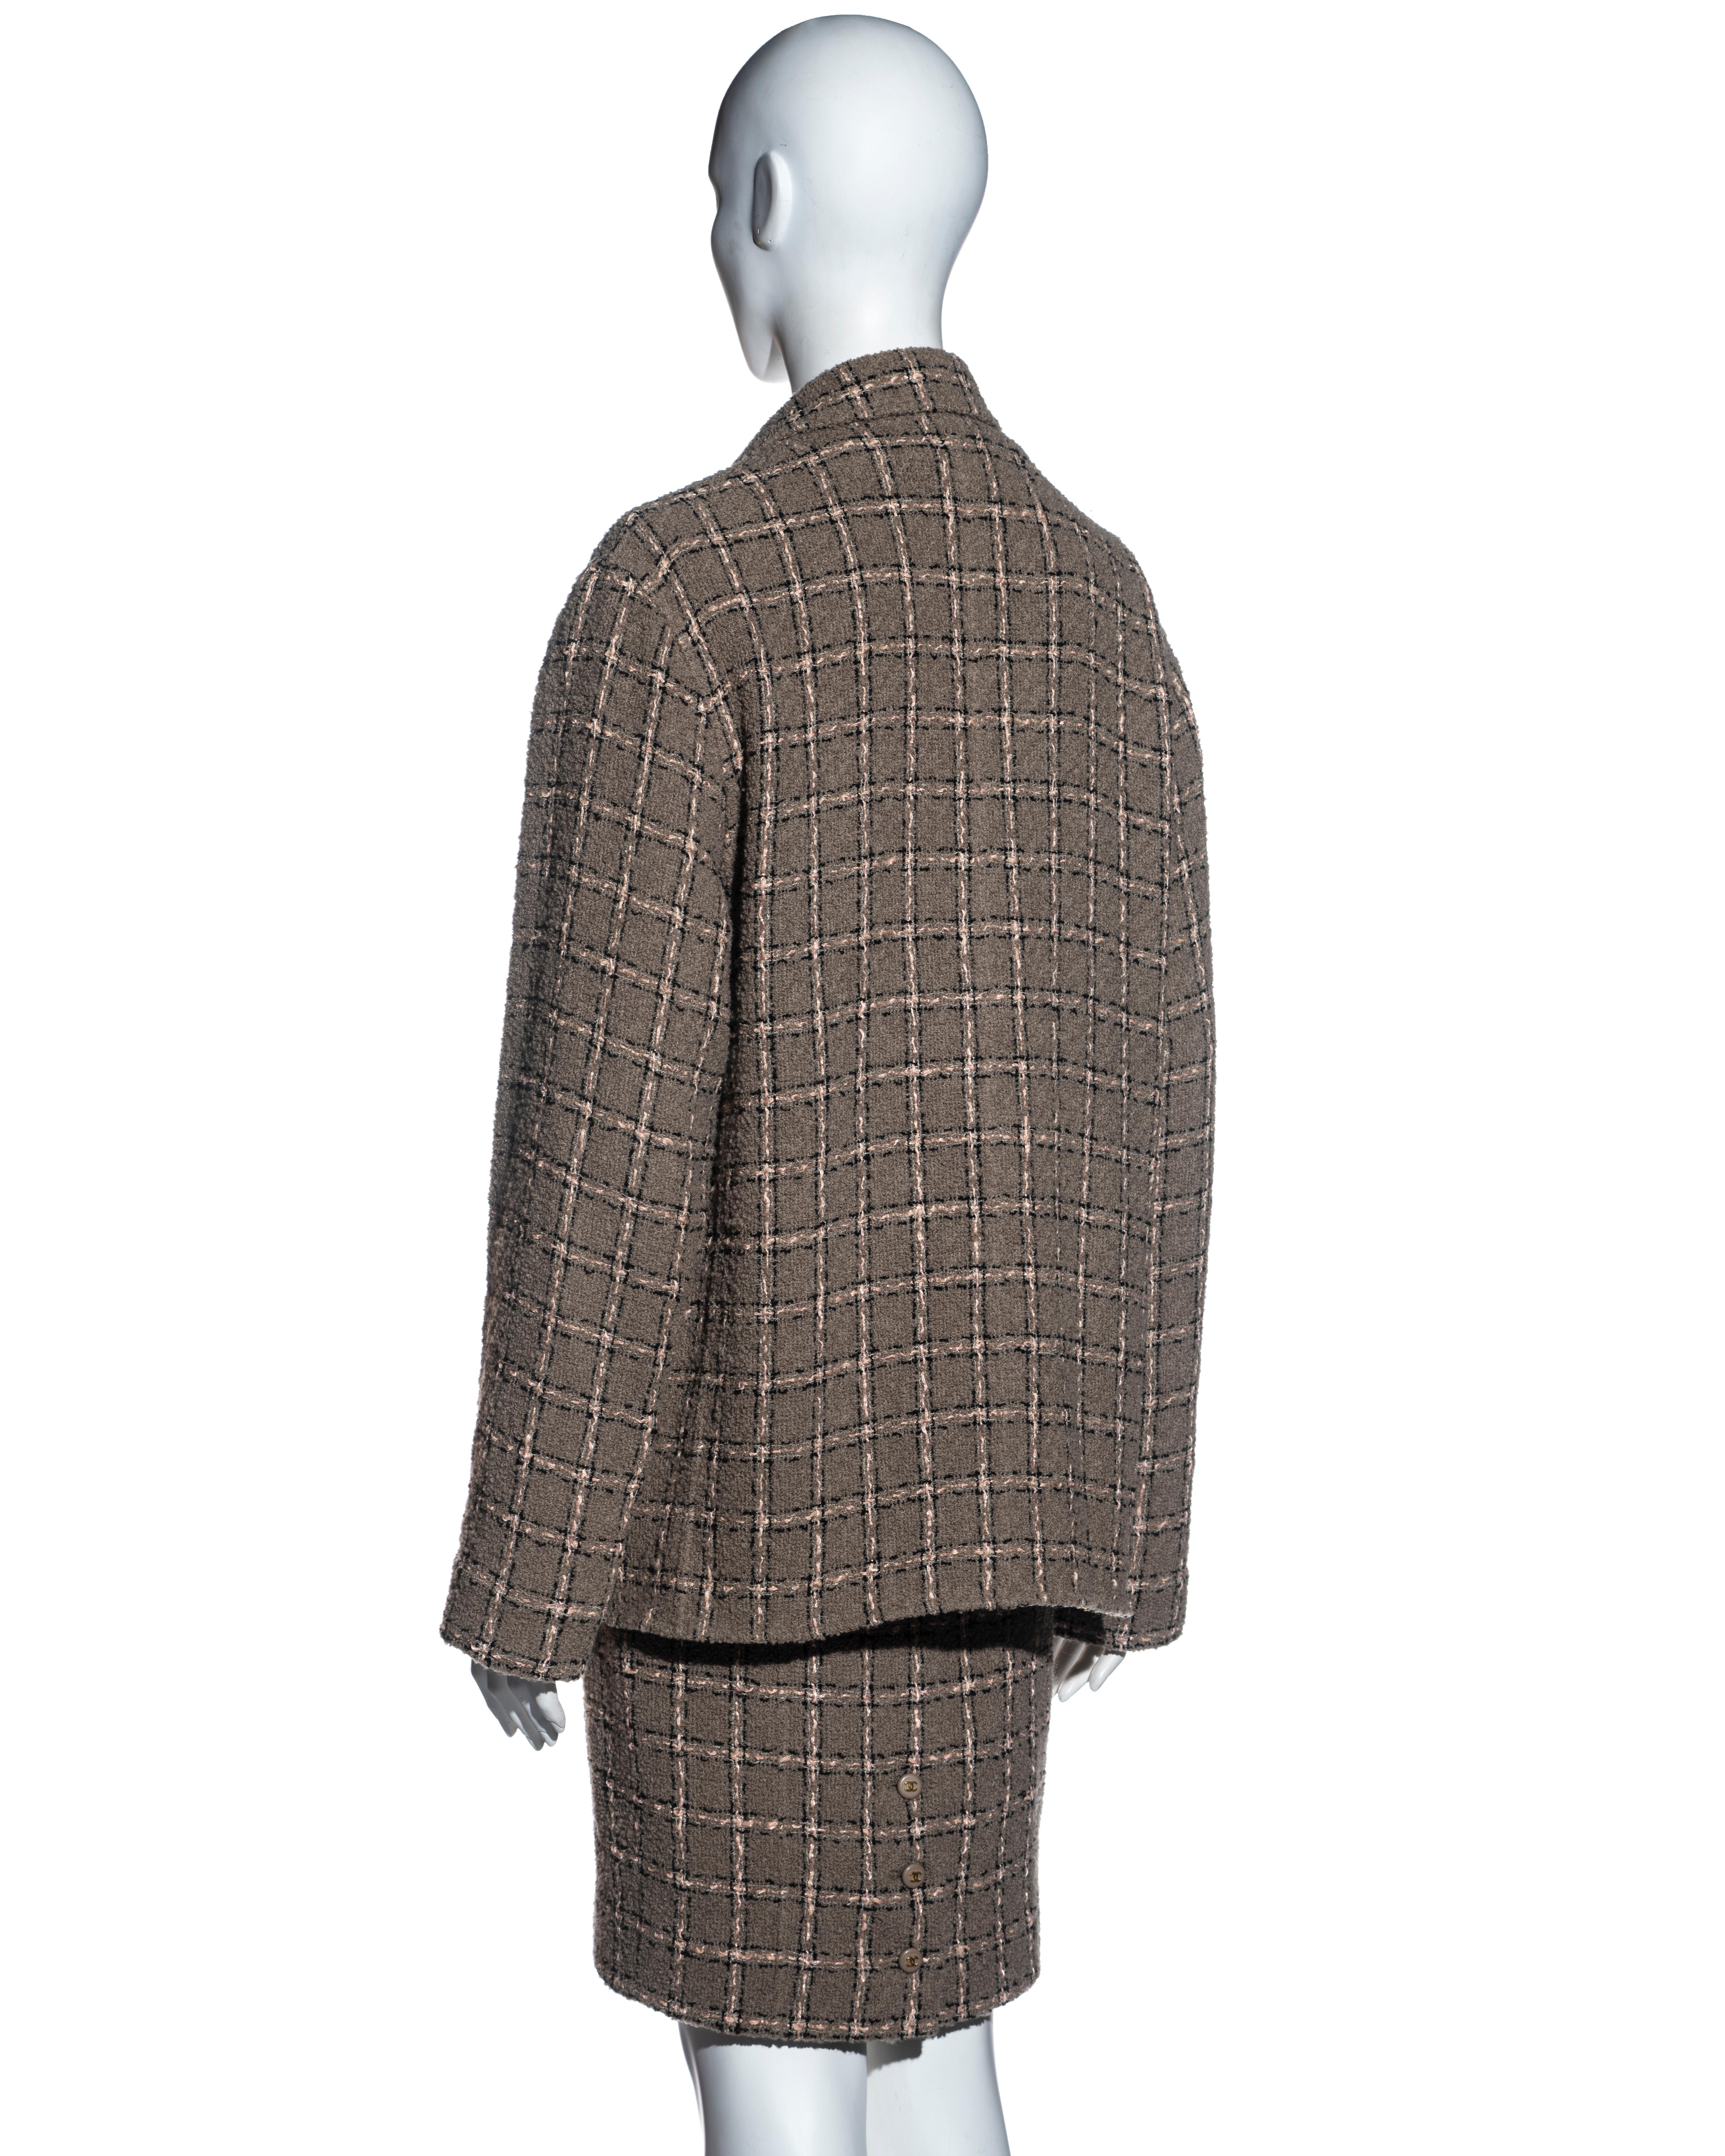 Chanel by Karl Lagerfeld checked taupe bouclé wool dress and jacket set, fw 1995 For Sale 3